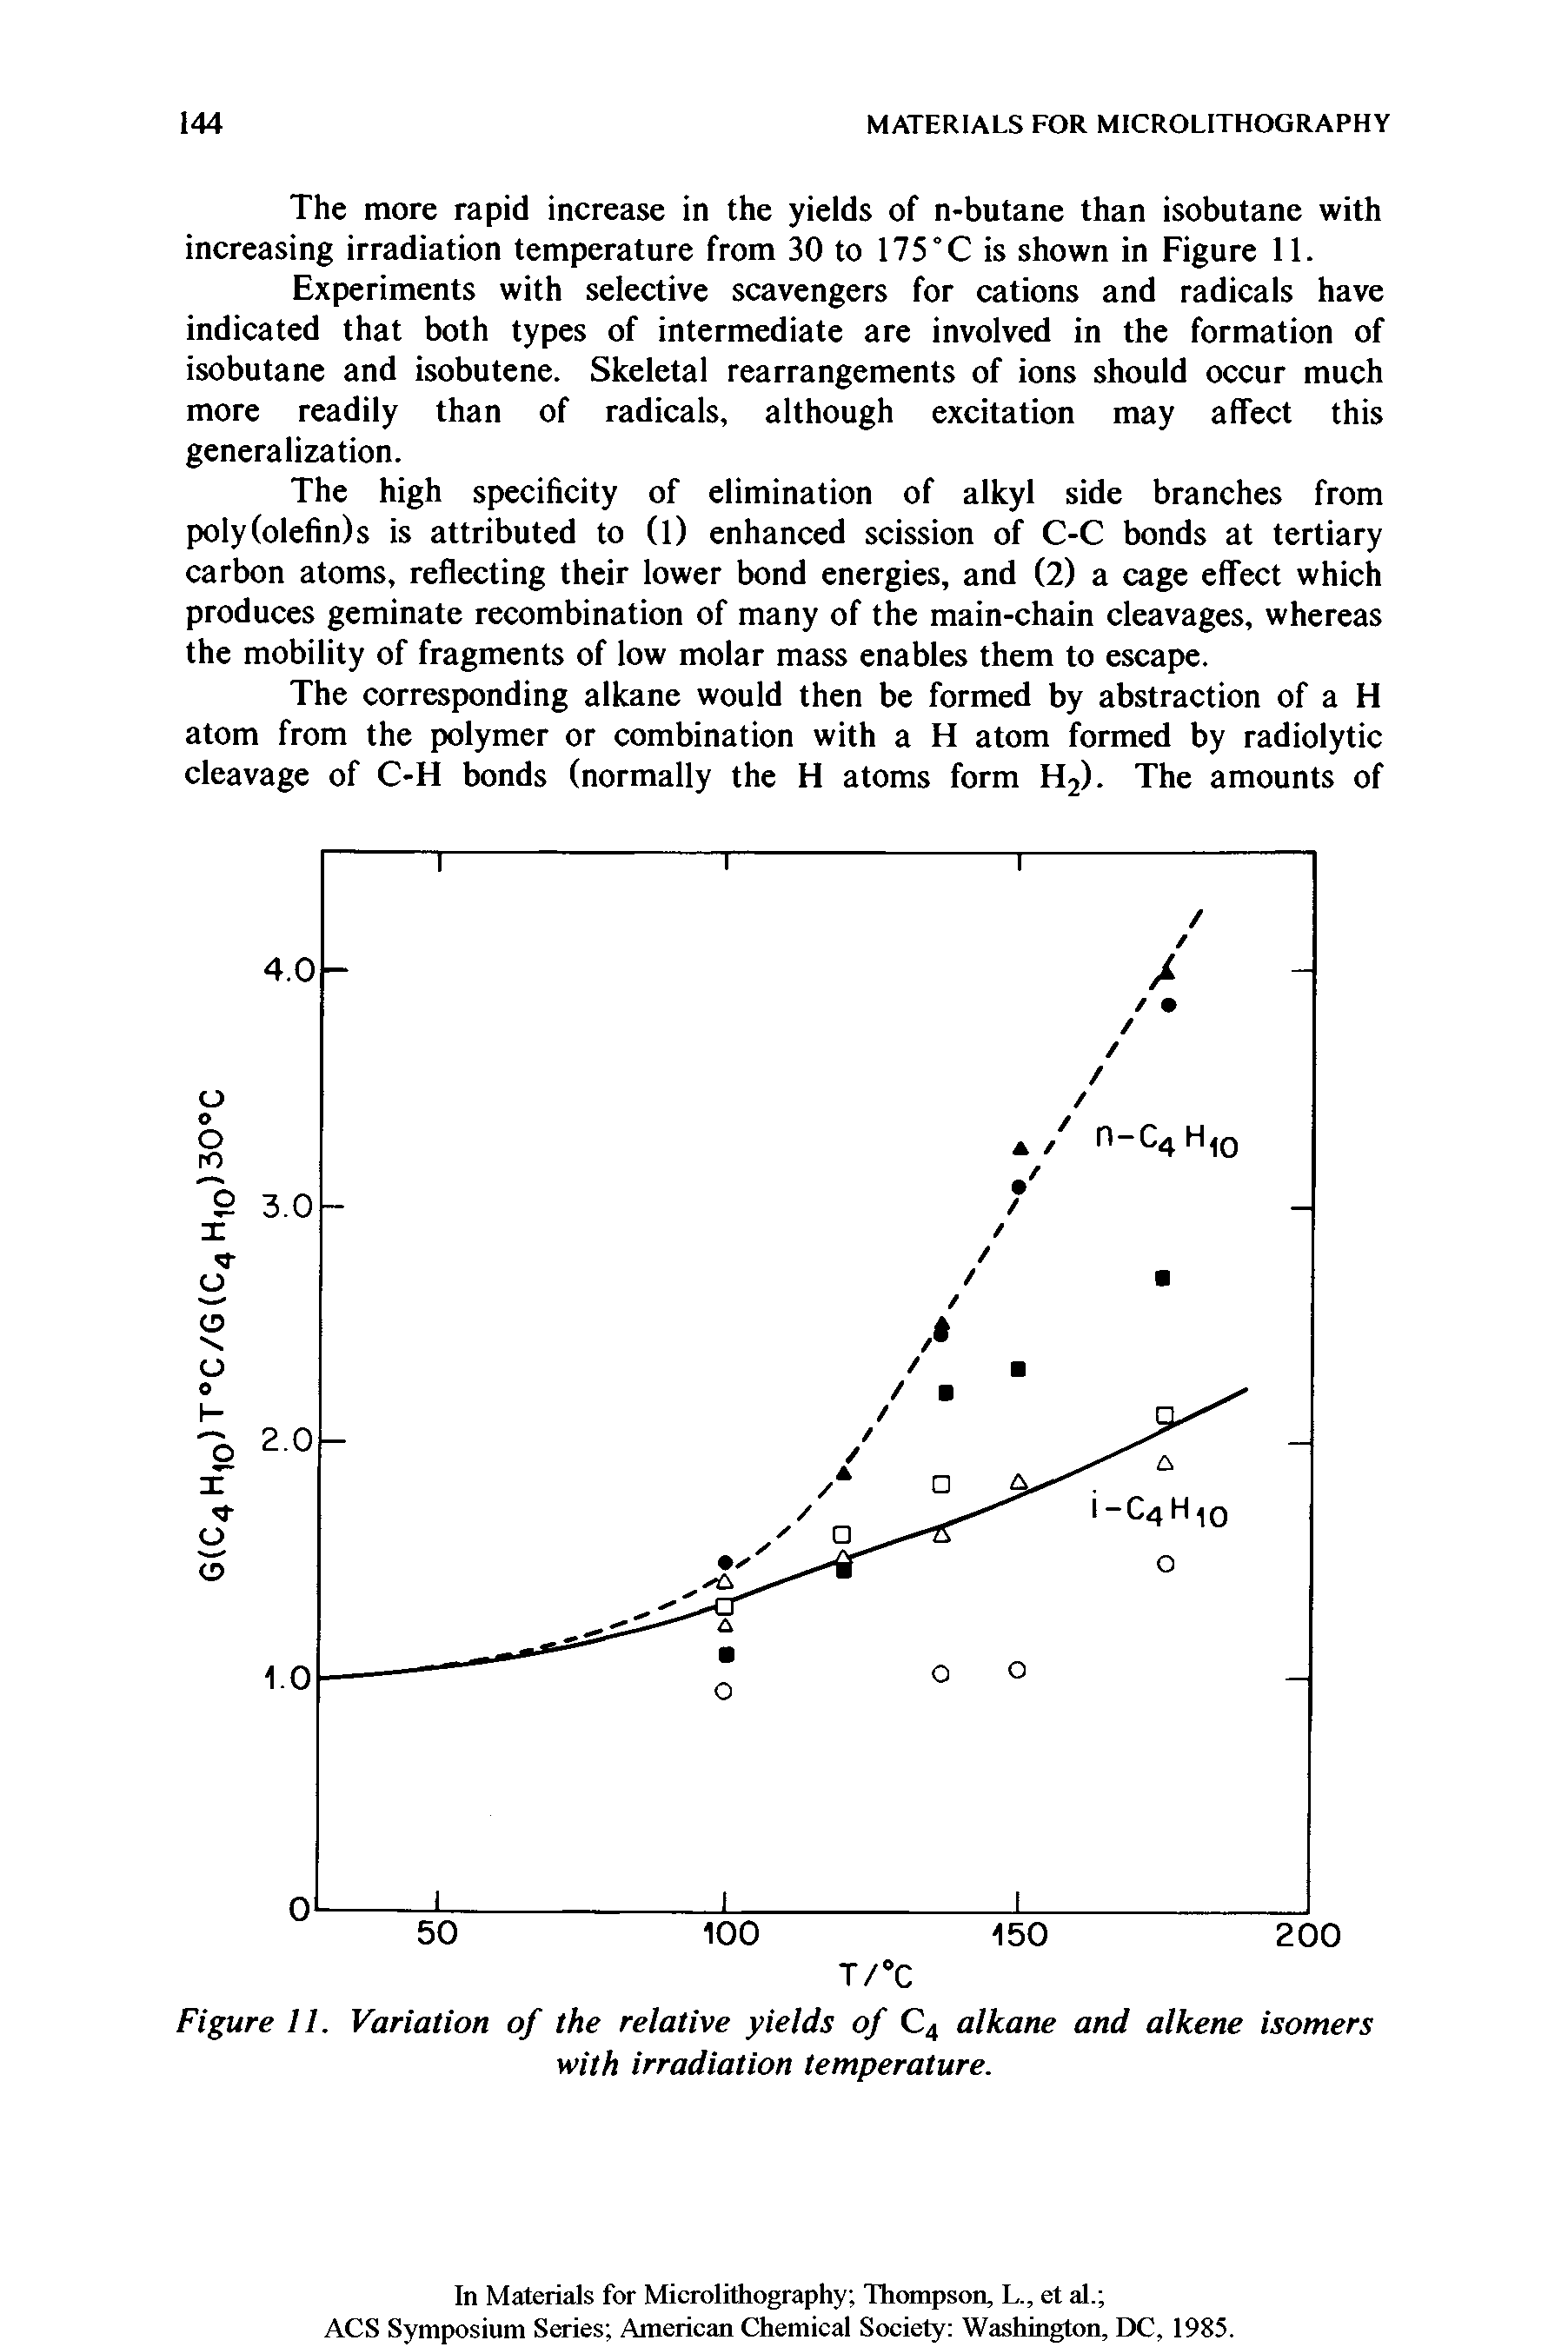 Figure 11. Variation of the relative yields of C4 alkane and alkene isomers with irradiation temperature.